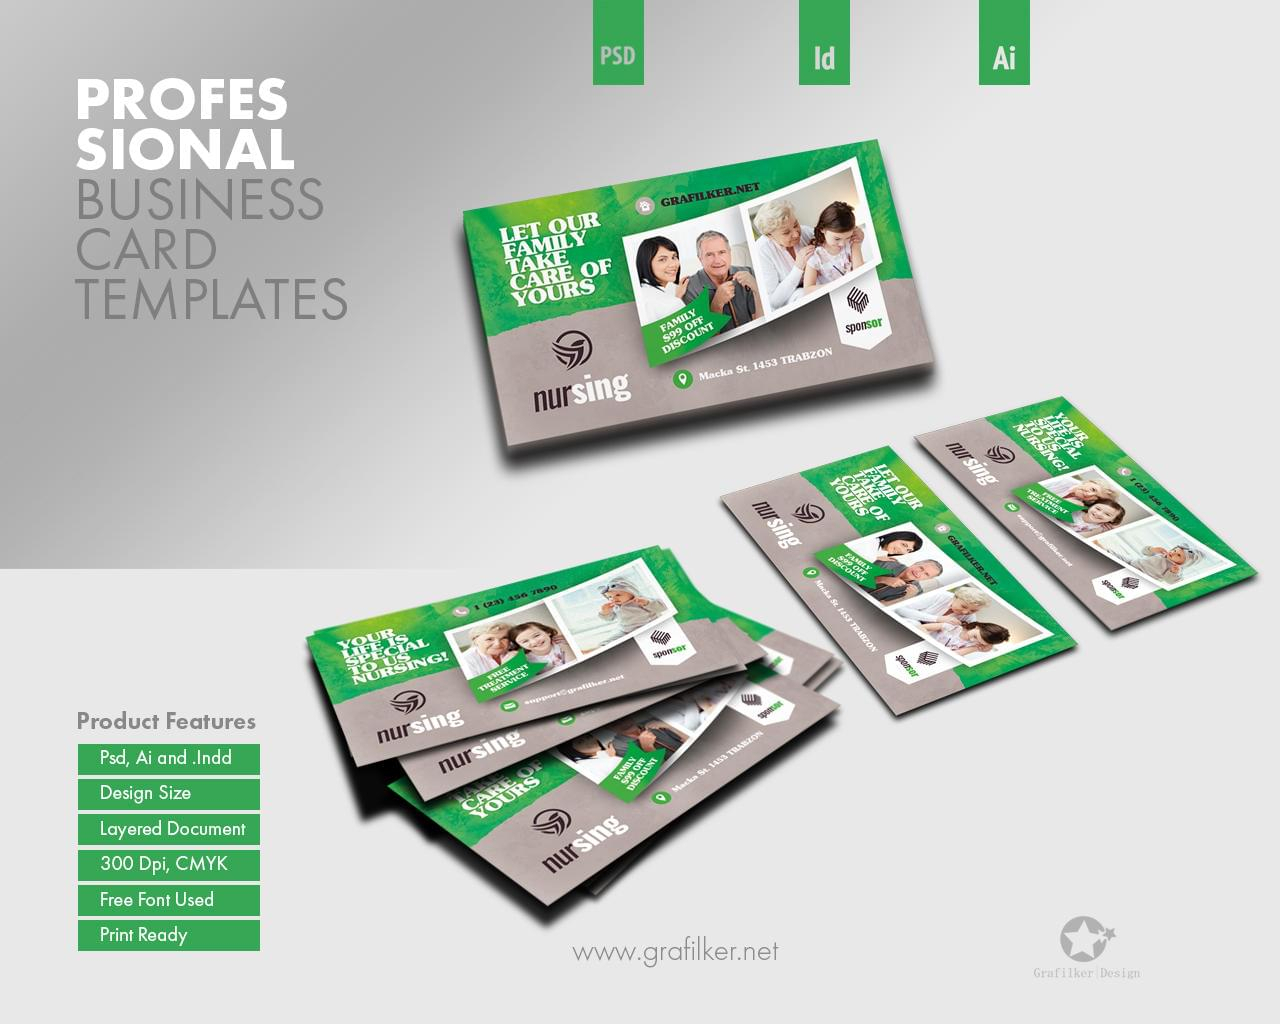 Professional Business Card Templatesgrafilker On Envato With Advertising Cards Templates